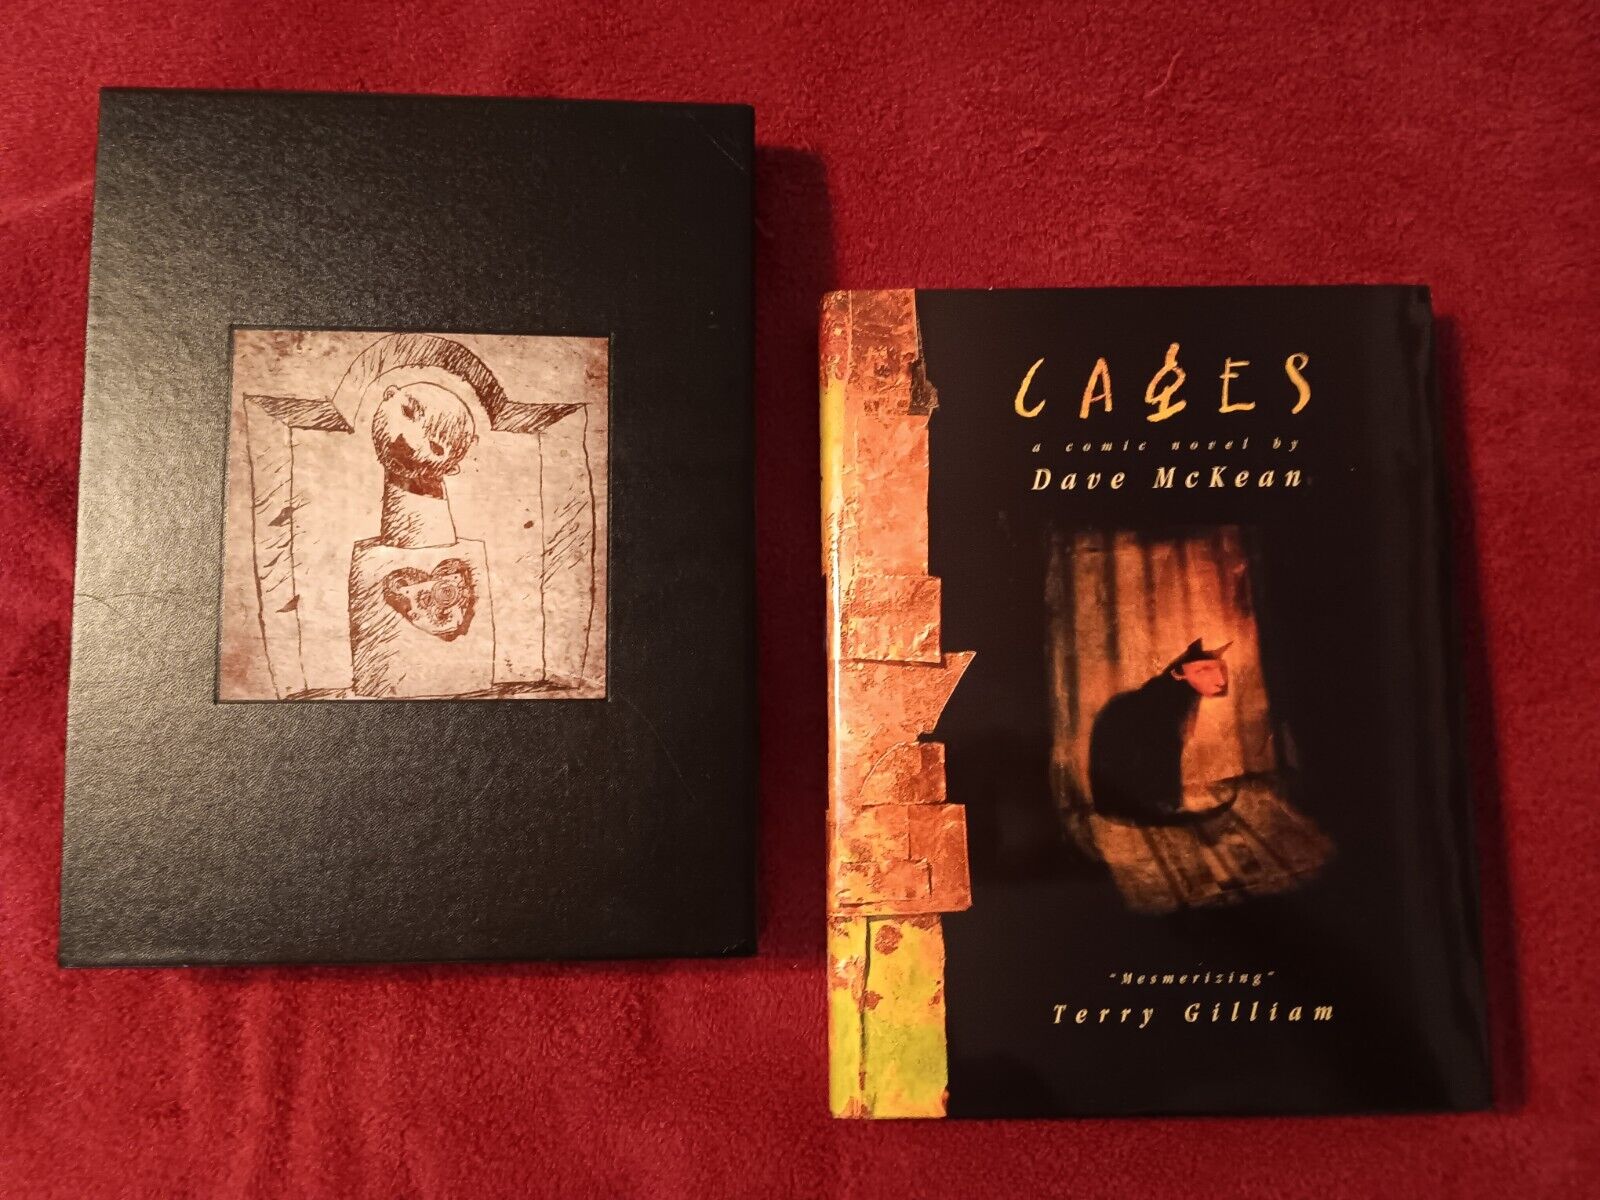 'Cages' HCDJ slipcase 1st Ed. signed & numbered w/ Audio CD Dave McKean 1998